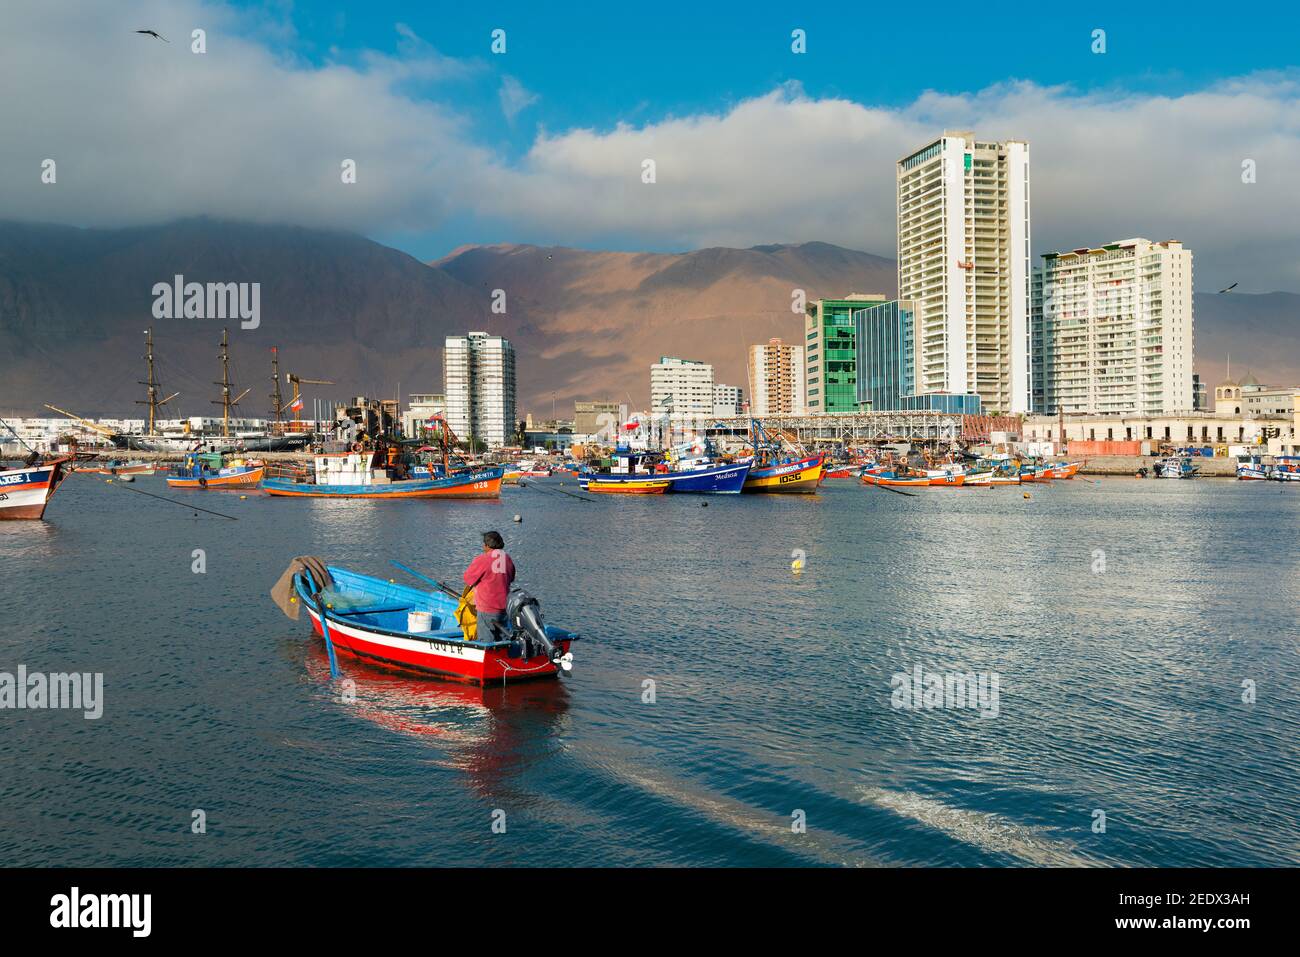 Iquique, Tarapaca Region, Chile - Fisherman in a boat at the marina of Iquique with city skyline in the back. Stock Photo